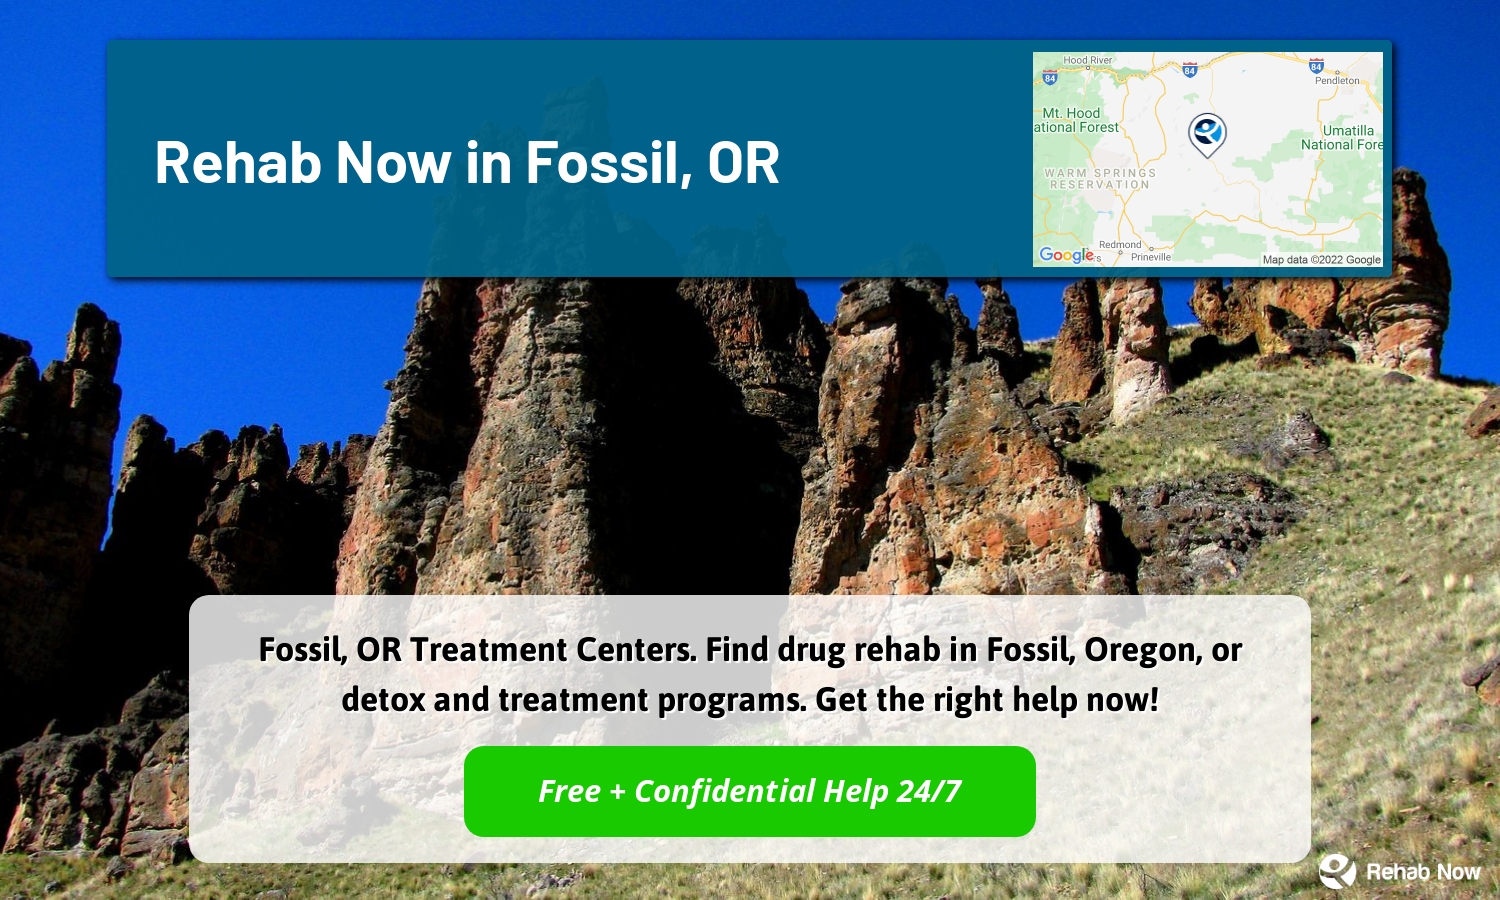 Fossil, OR Treatment Centers. Find drug rehab in Fossil, Oregon, or detox and treatment programs. Get the right help now!